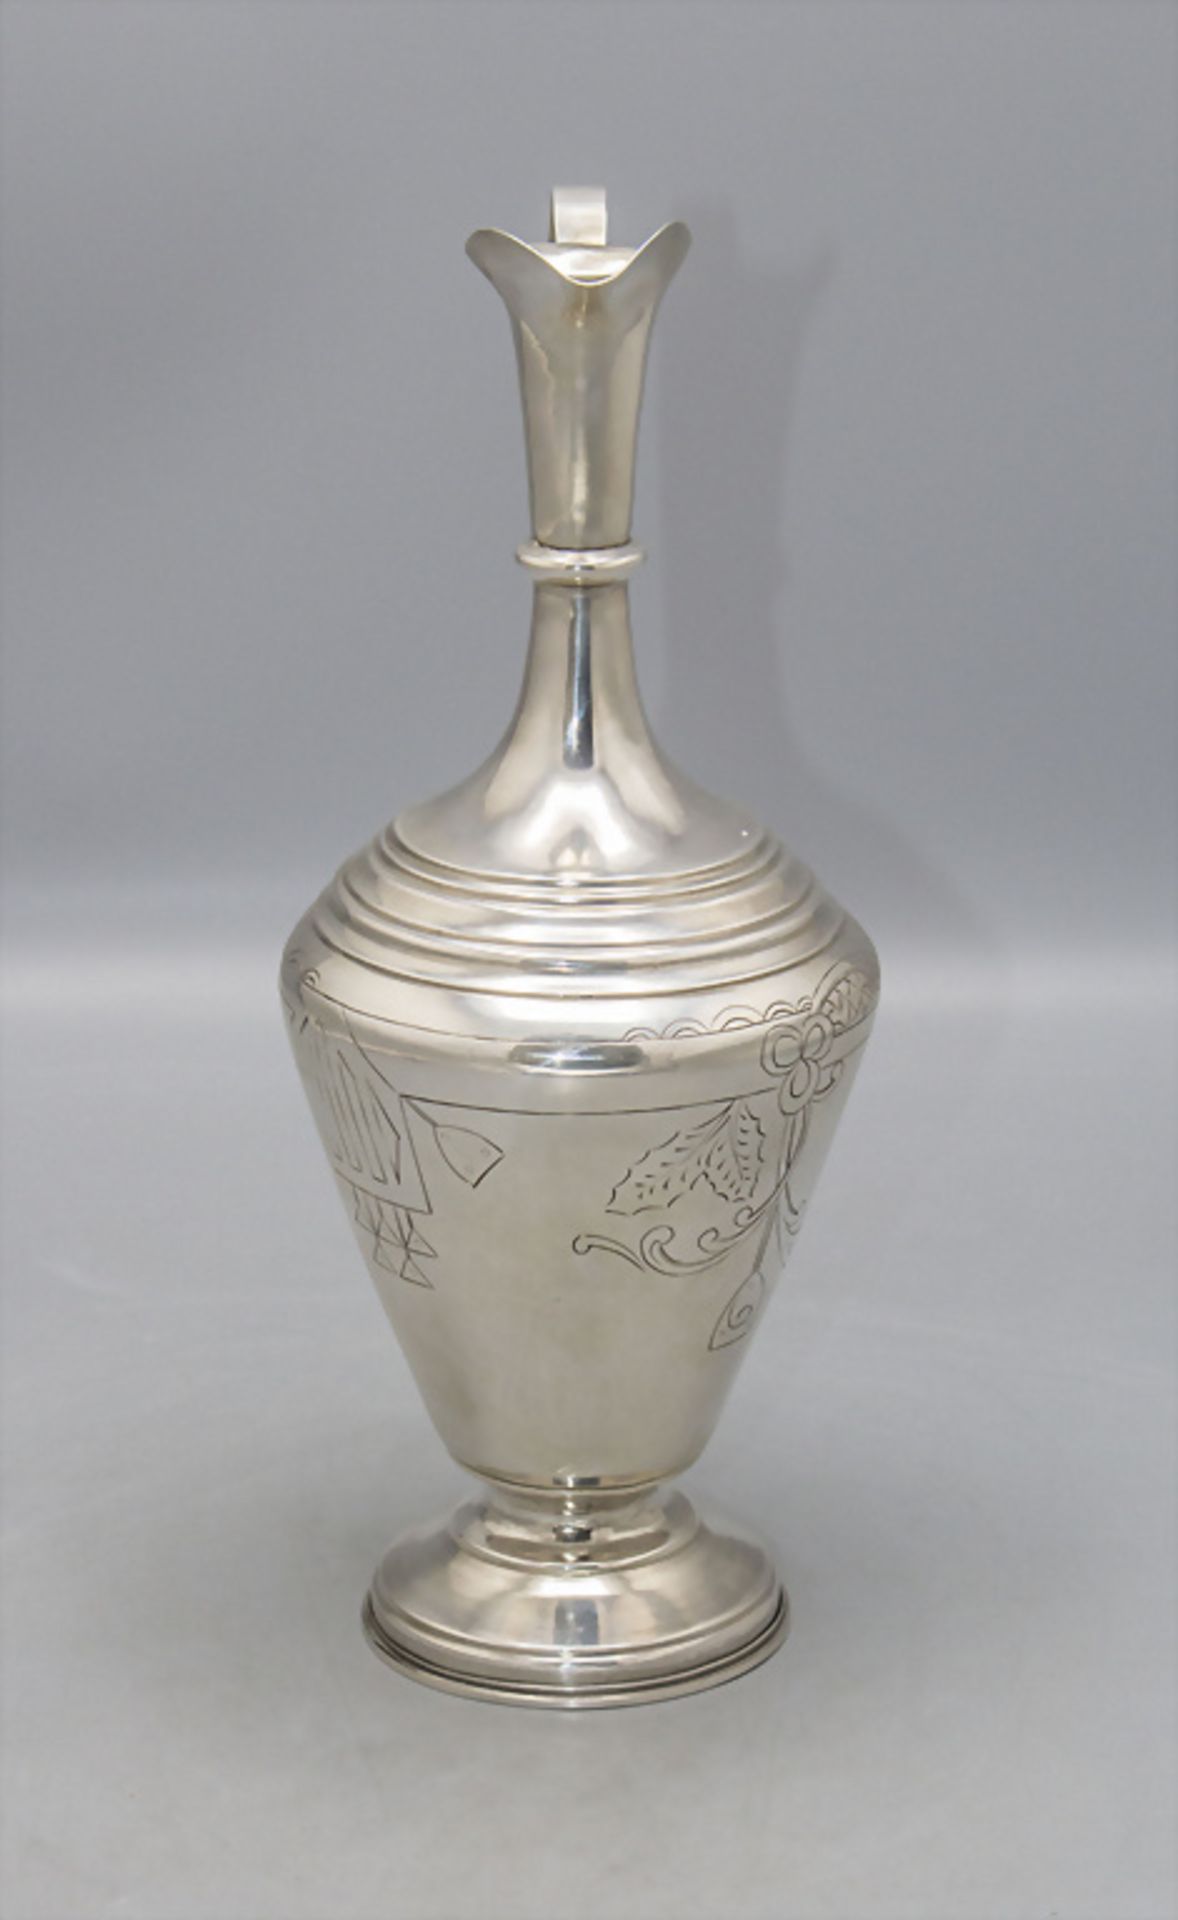 Schenkkrug / A silver jug, Vasily Sergeevich Sikachev, Moskau/Moscow, 1908-1917 - Image 2 of 6